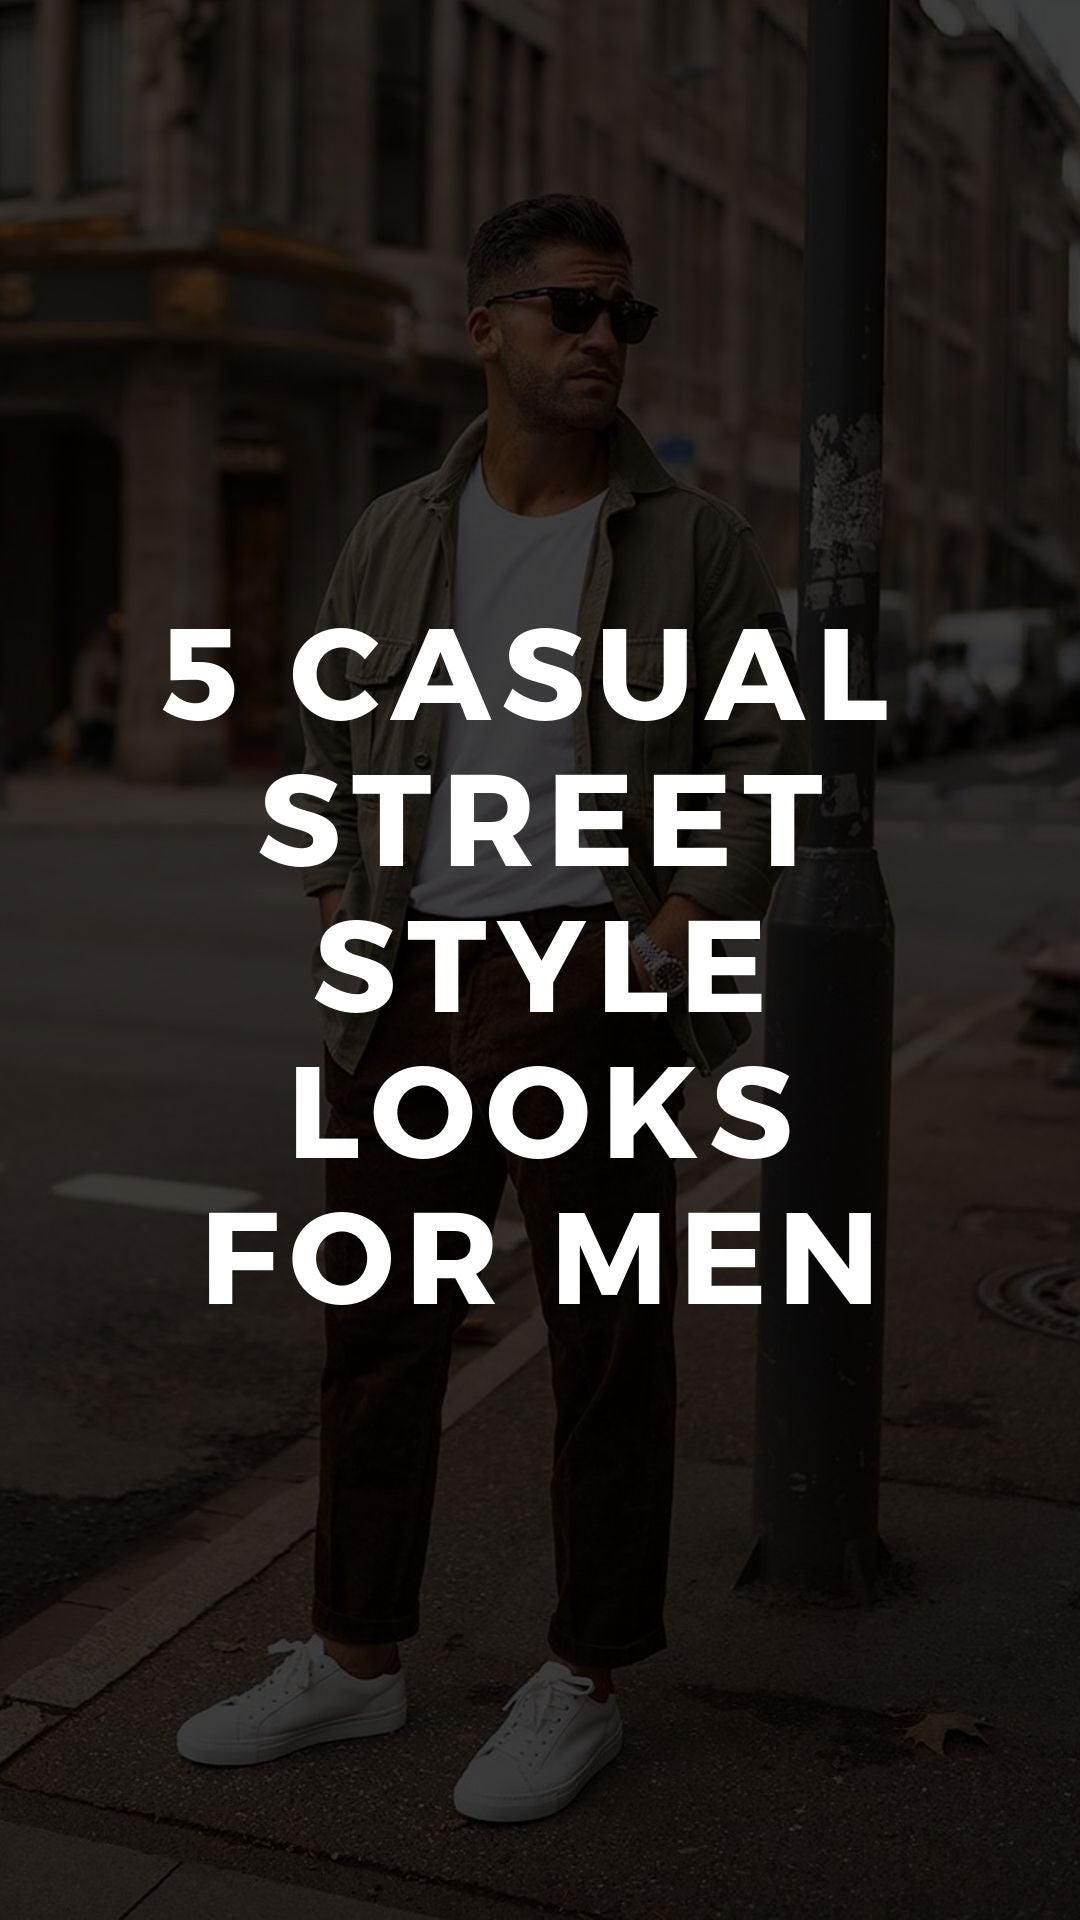 5 Casual Street Style Looks For Men - LIFESTYLE BY PS